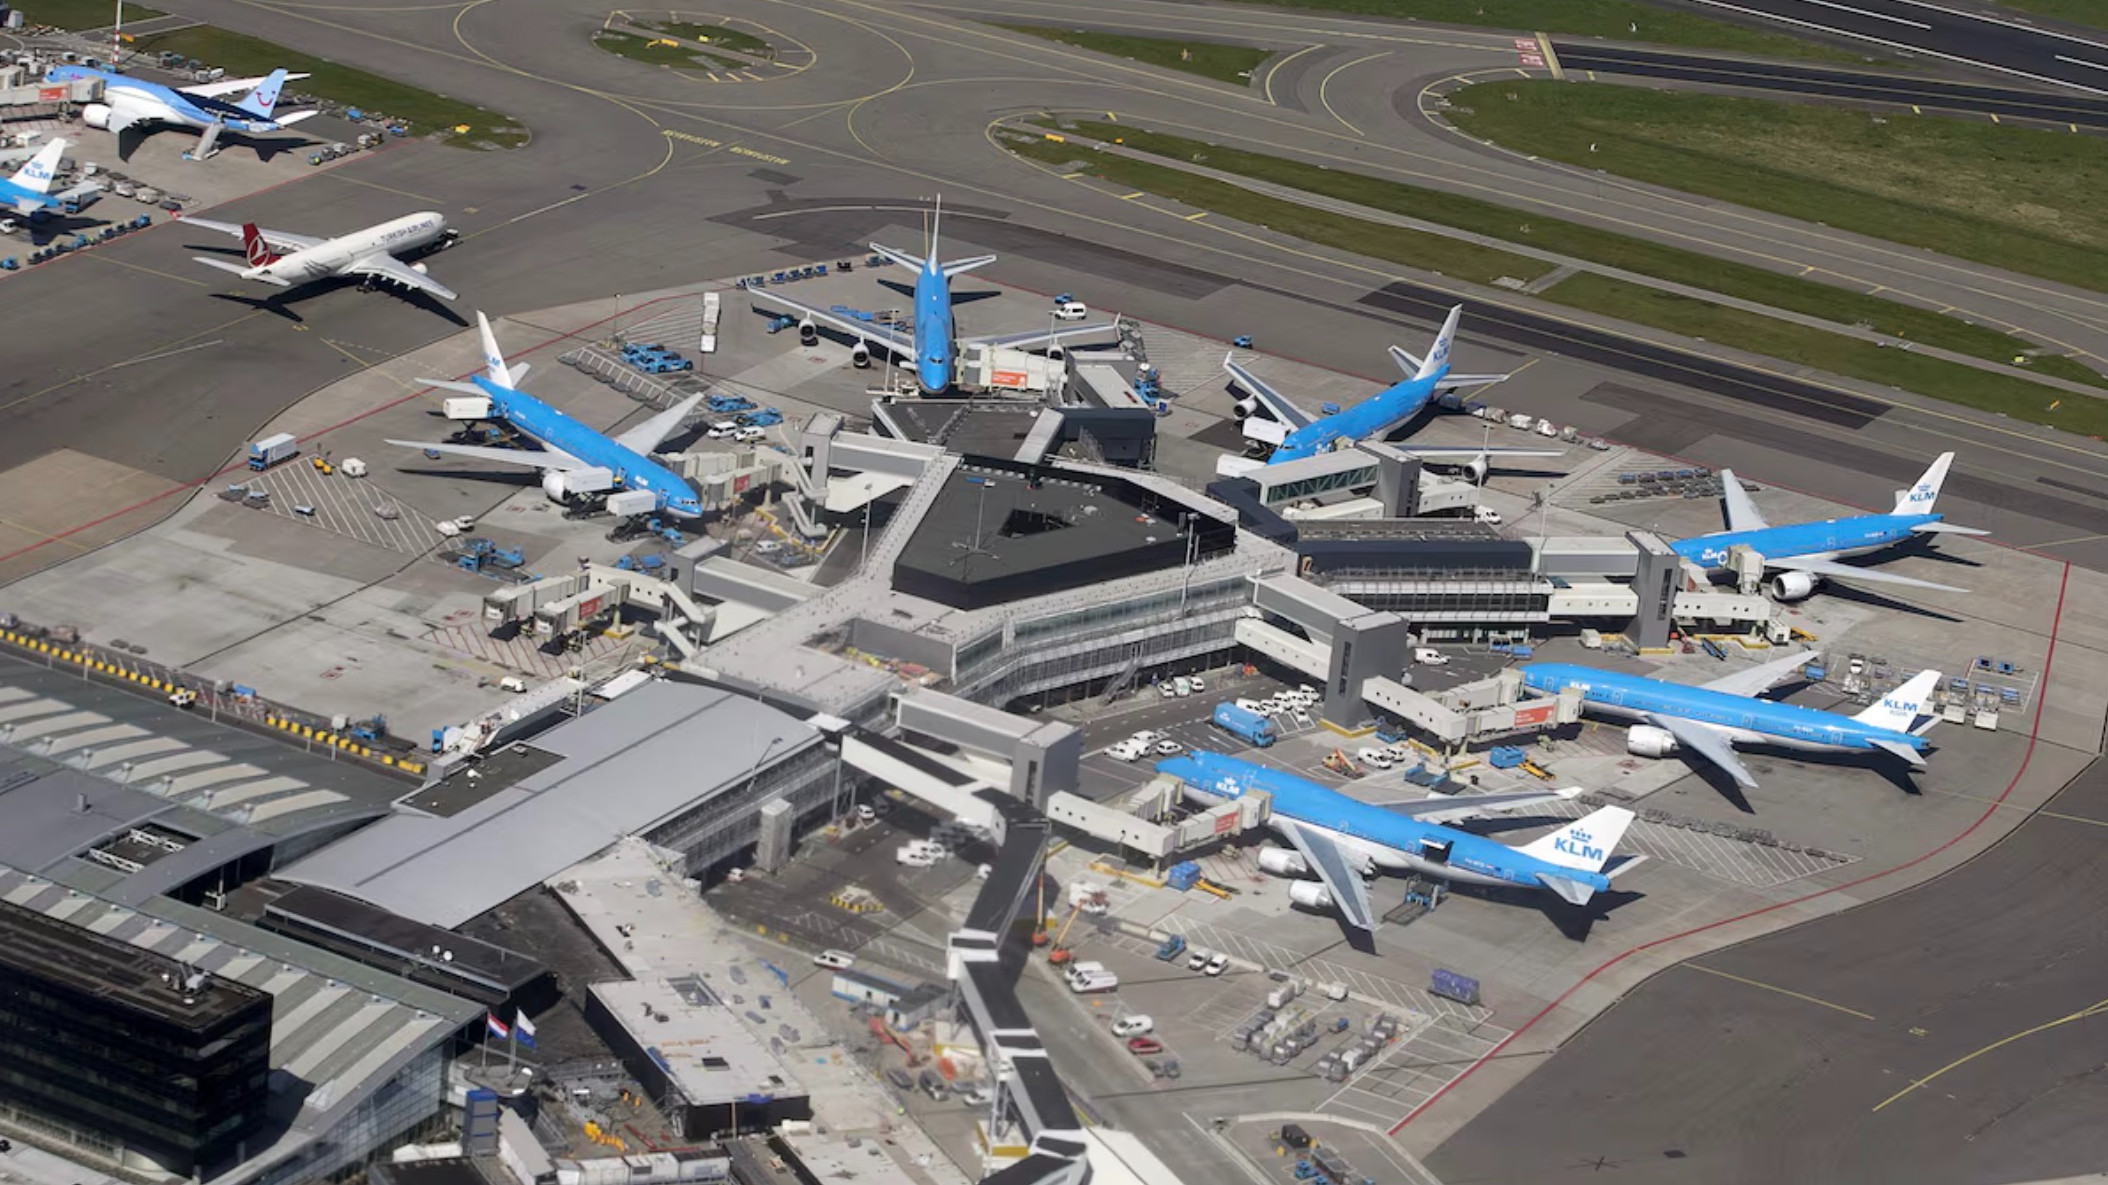 KLM aircraft are seen on the tarmac at Schipol airport near Amsterdam April 15, 2015. /Reuters